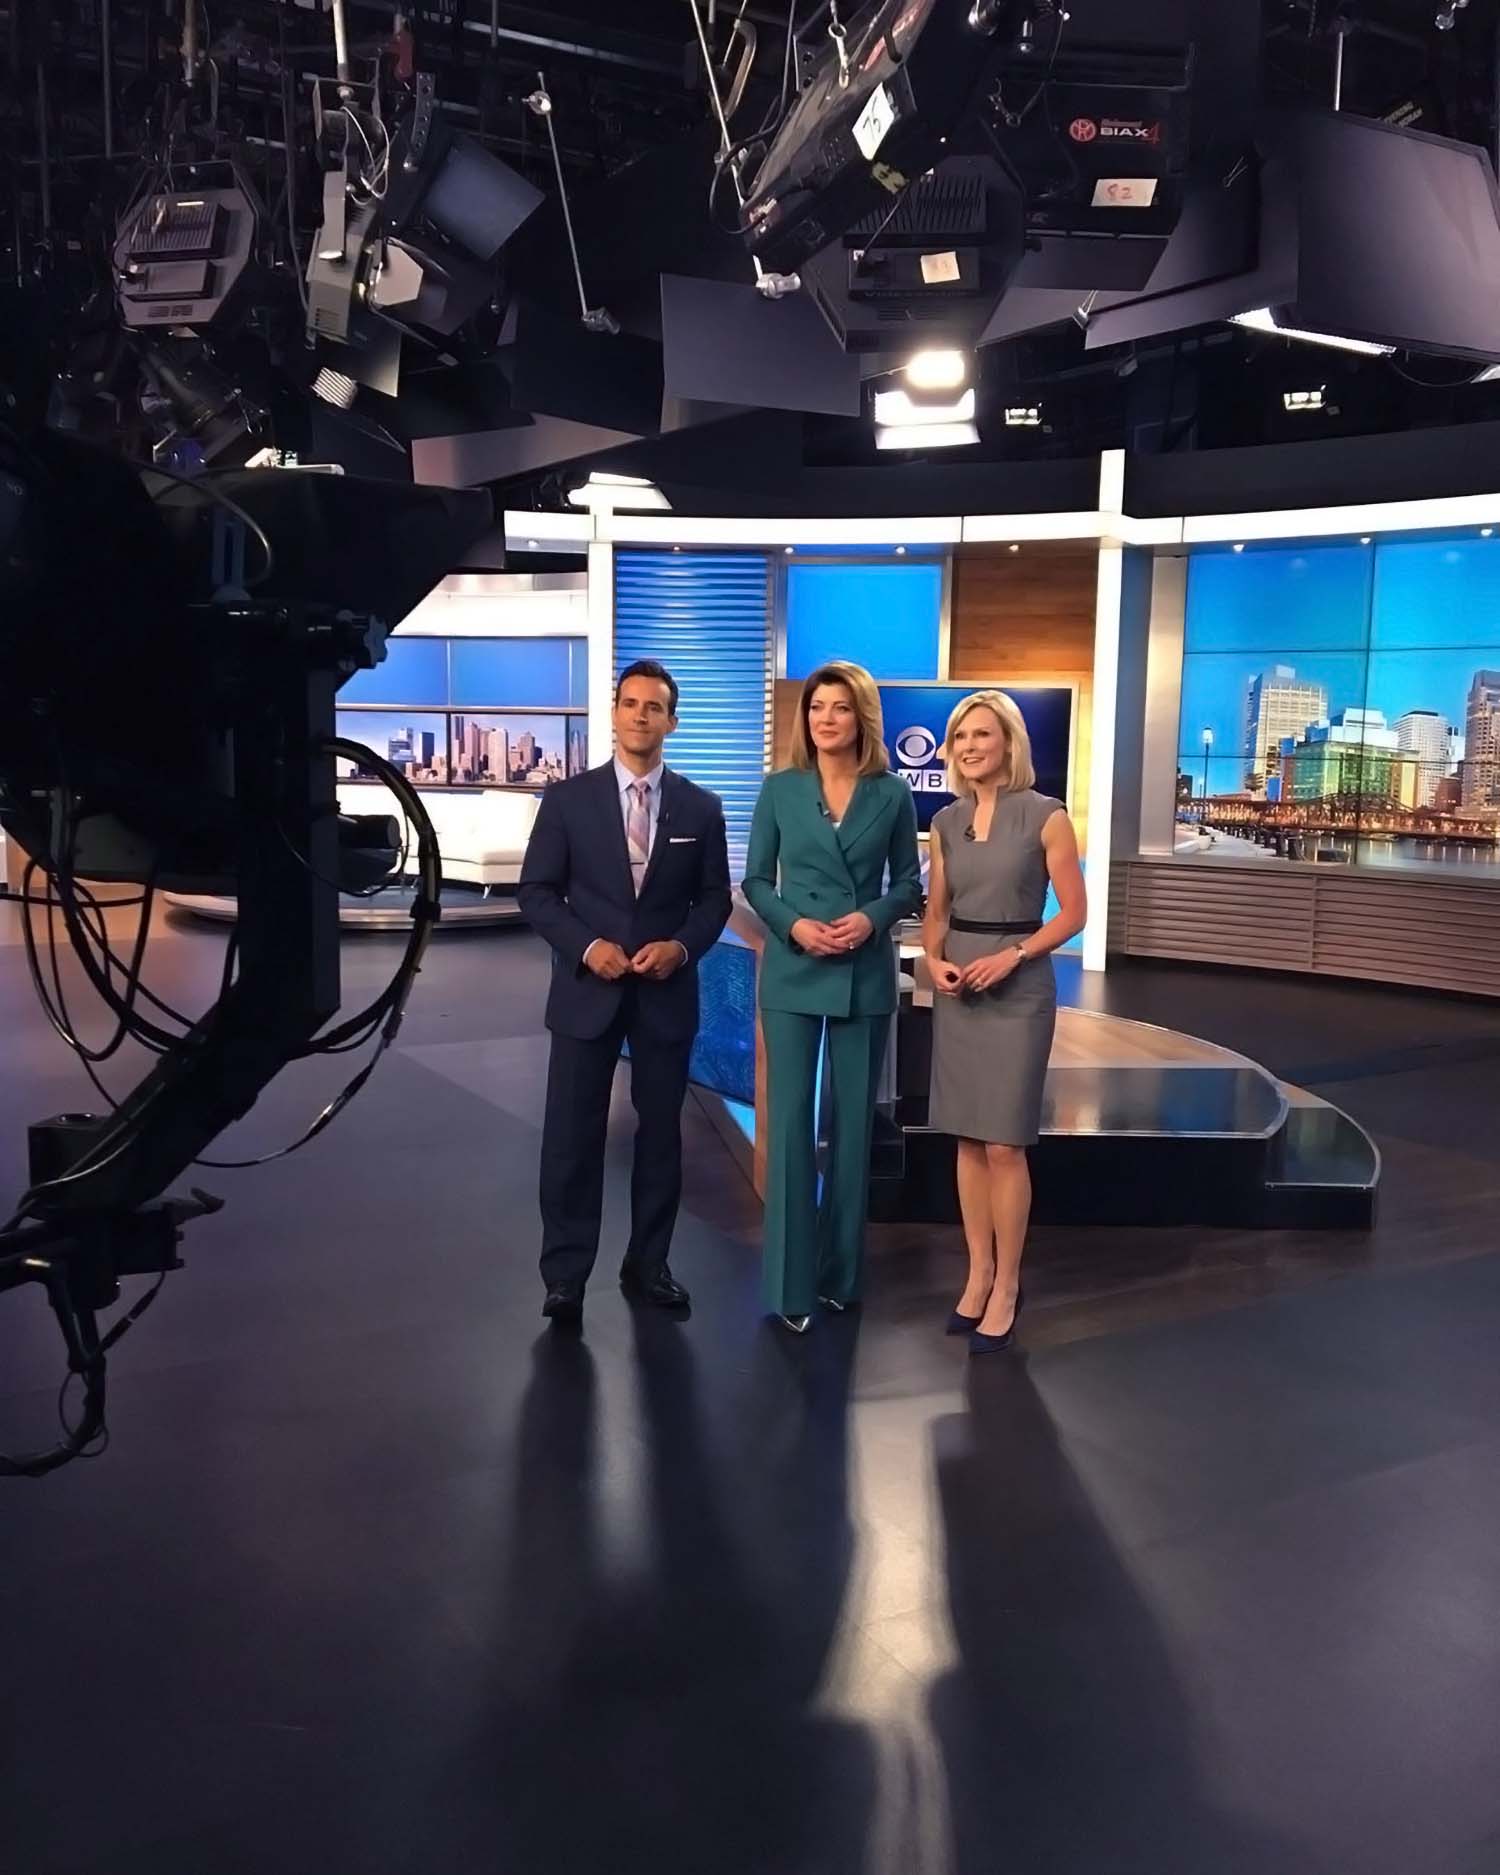 Norah O'Donnell, and other members of CBS Boston